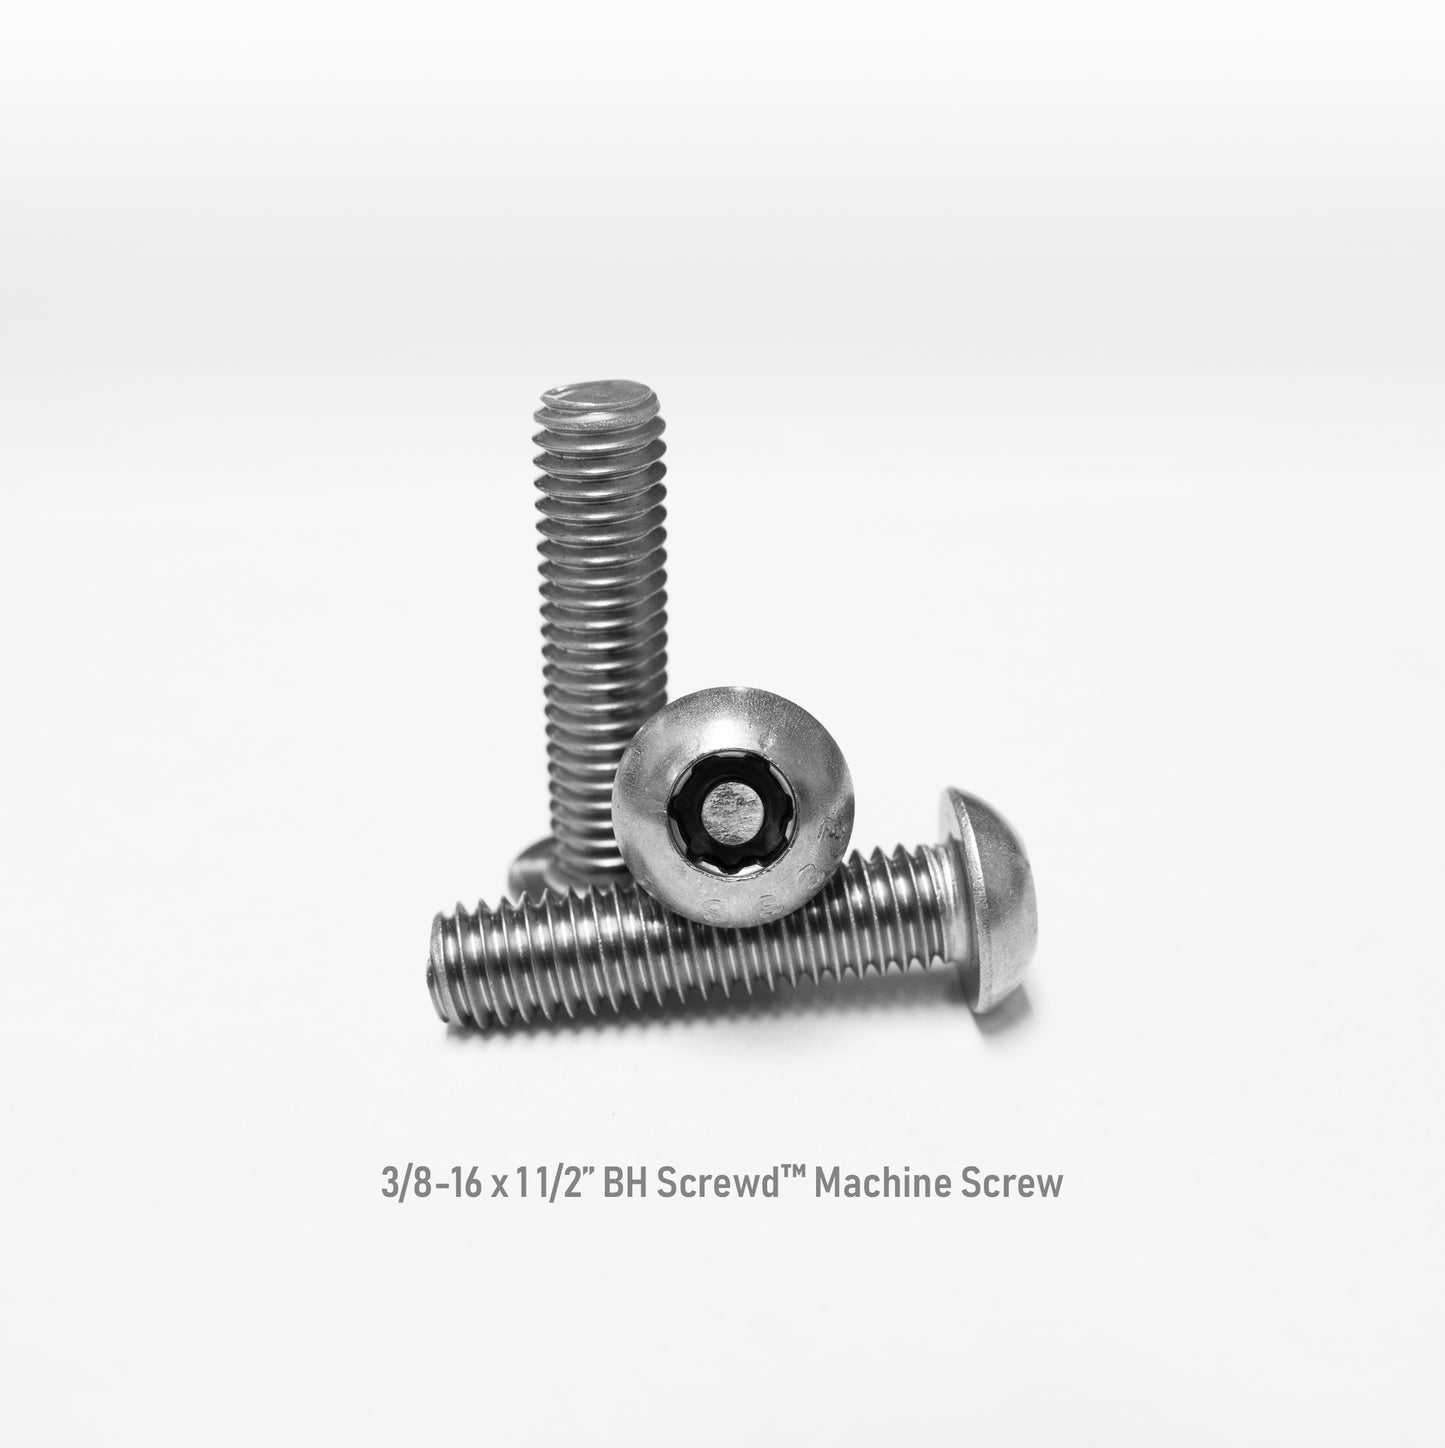 3/8-16 x 1 1/2" Button Head Screwd® Security  Machine Screw Made out of Stainless Steel